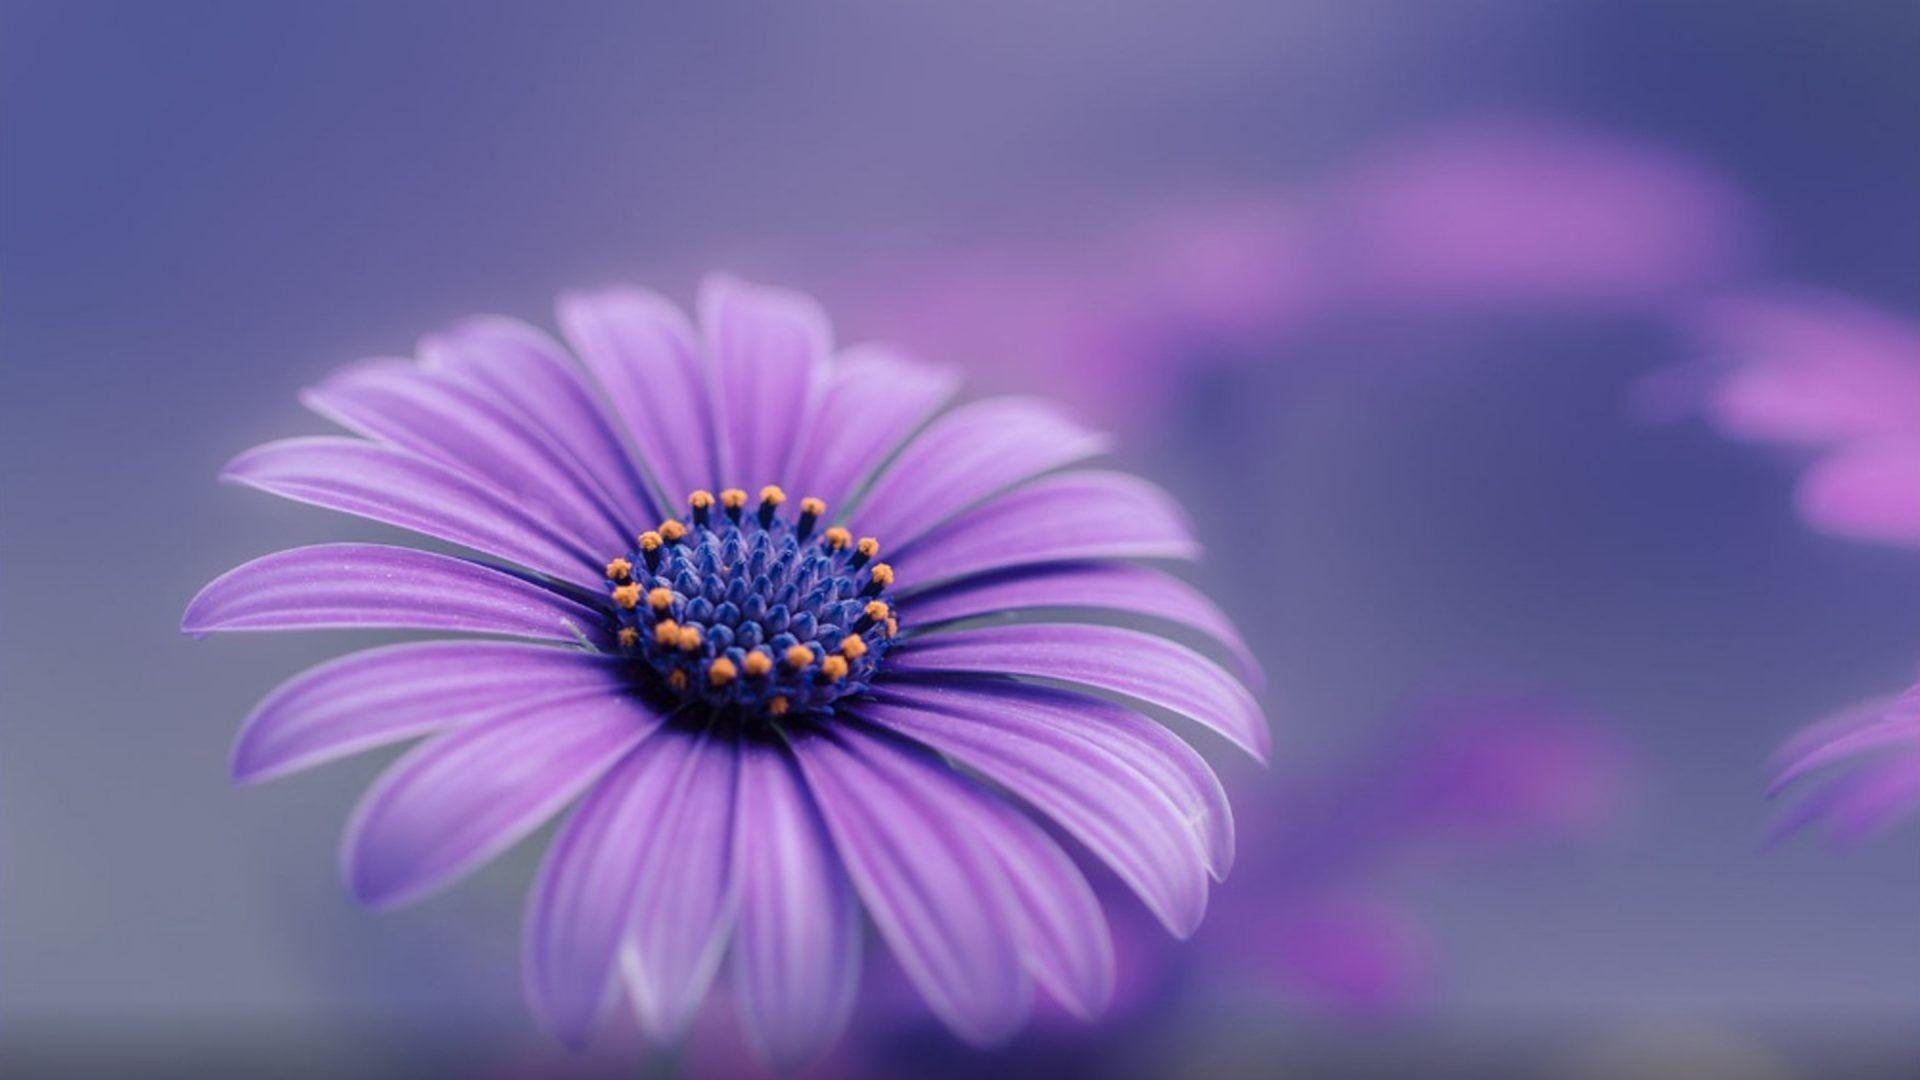 1920 X 1080 Flower Wallpapers - Top Free 1920 X 1080 Flower Backgrounds